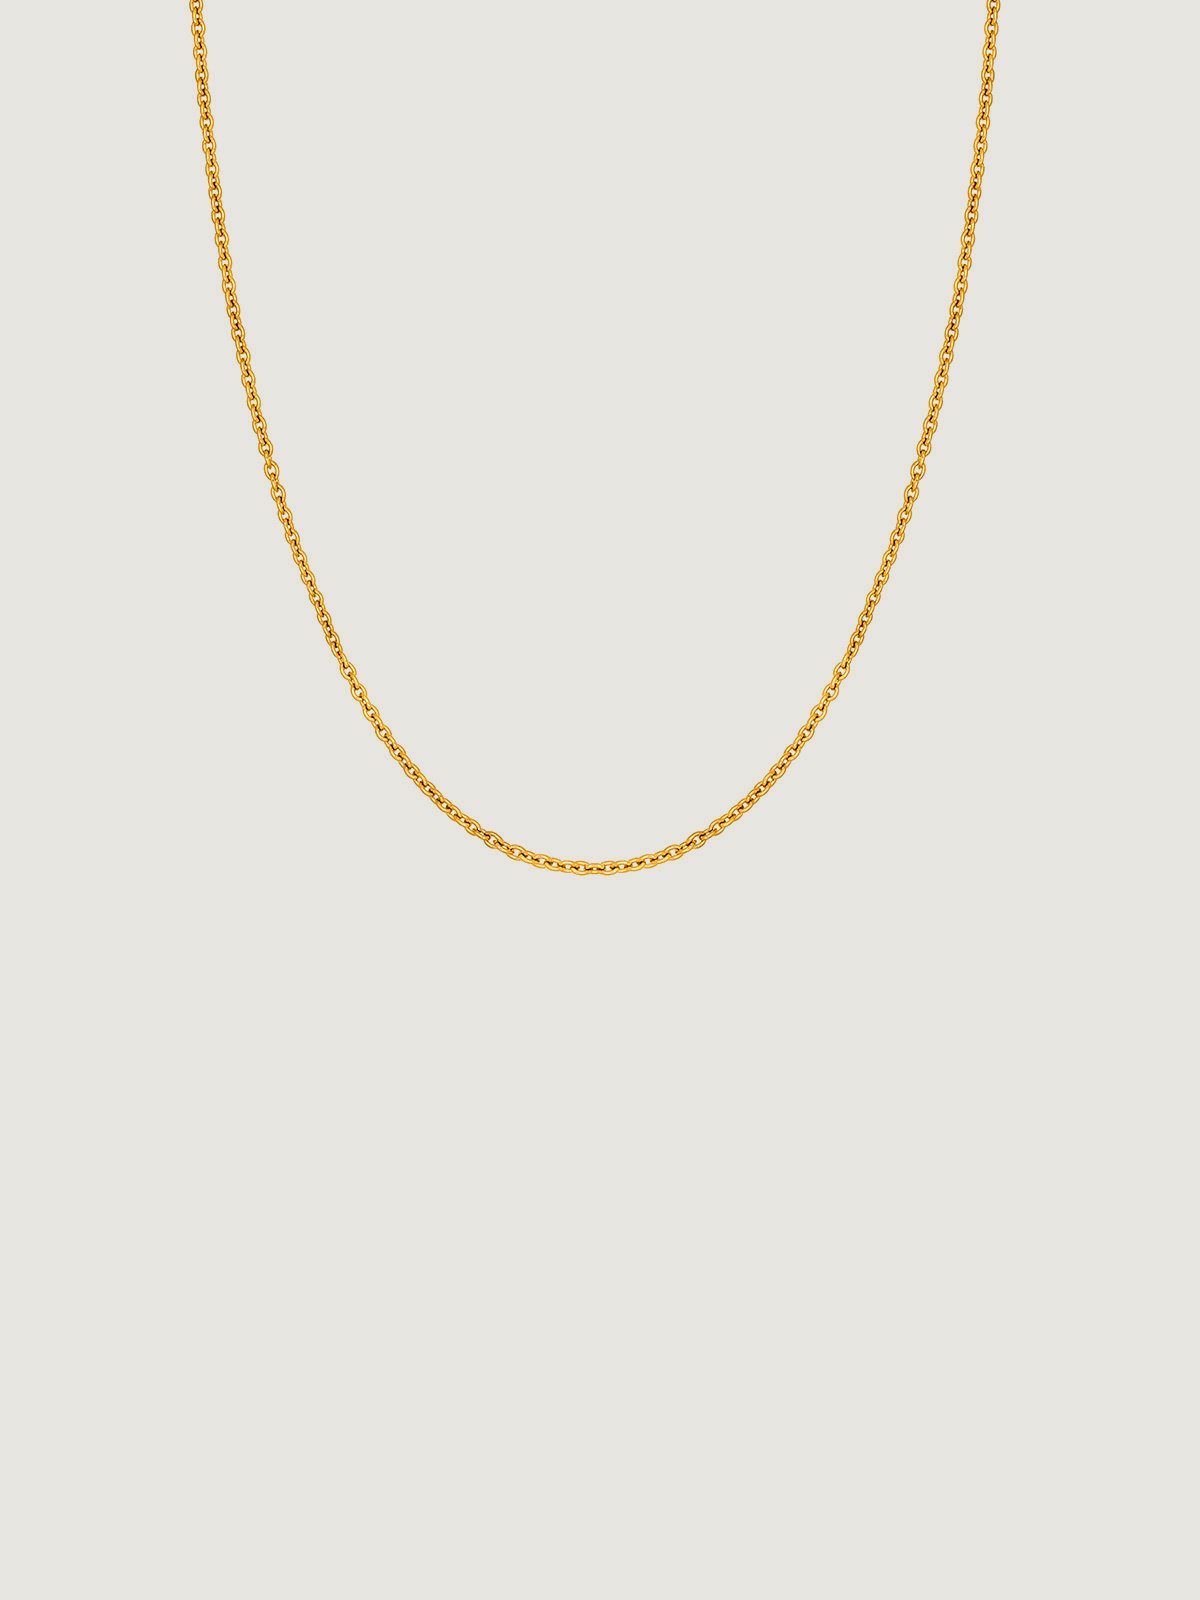 Long 925 silver chain dipped in 18K yellow gold